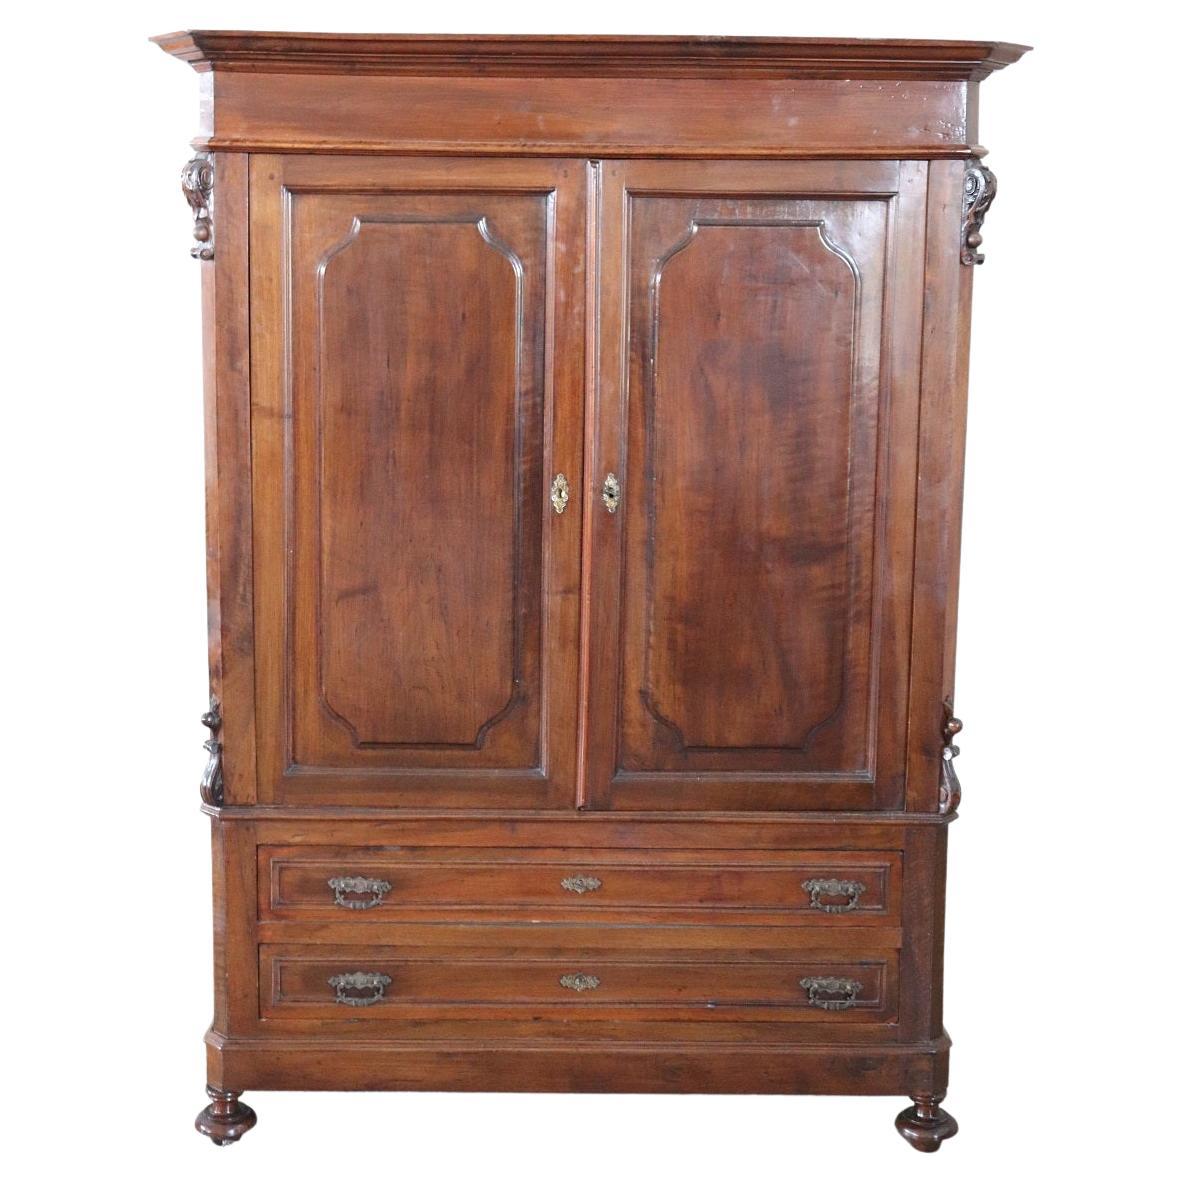 19th Century Italian Solid Walnut Wood Antique Wardrobe or Armoire For Sale